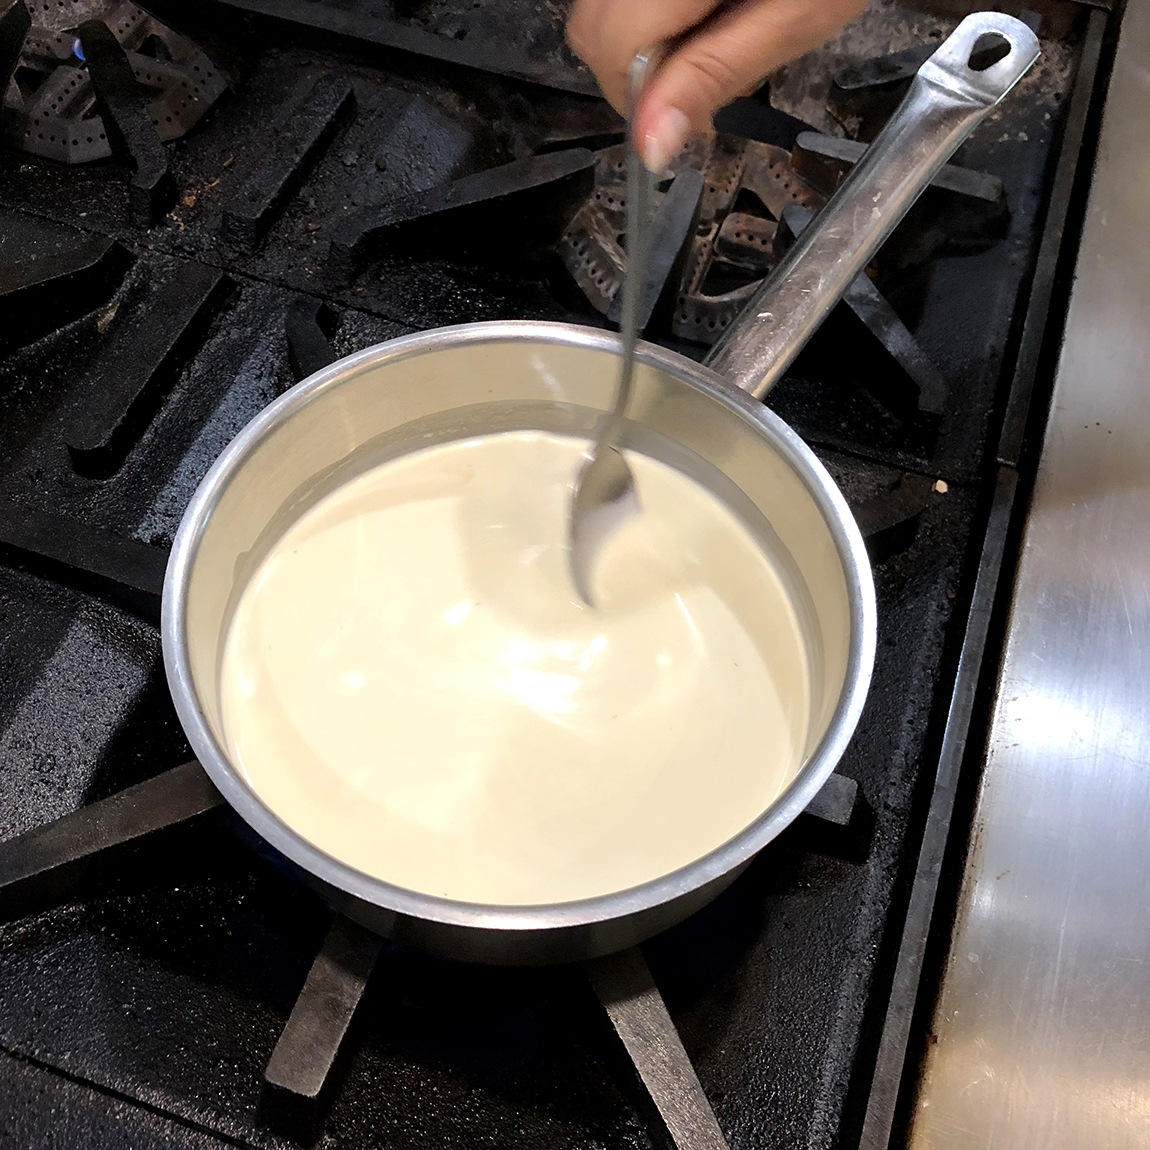 Summer Wright mixes a creamy substance in a metal saucepan on a stovetop.